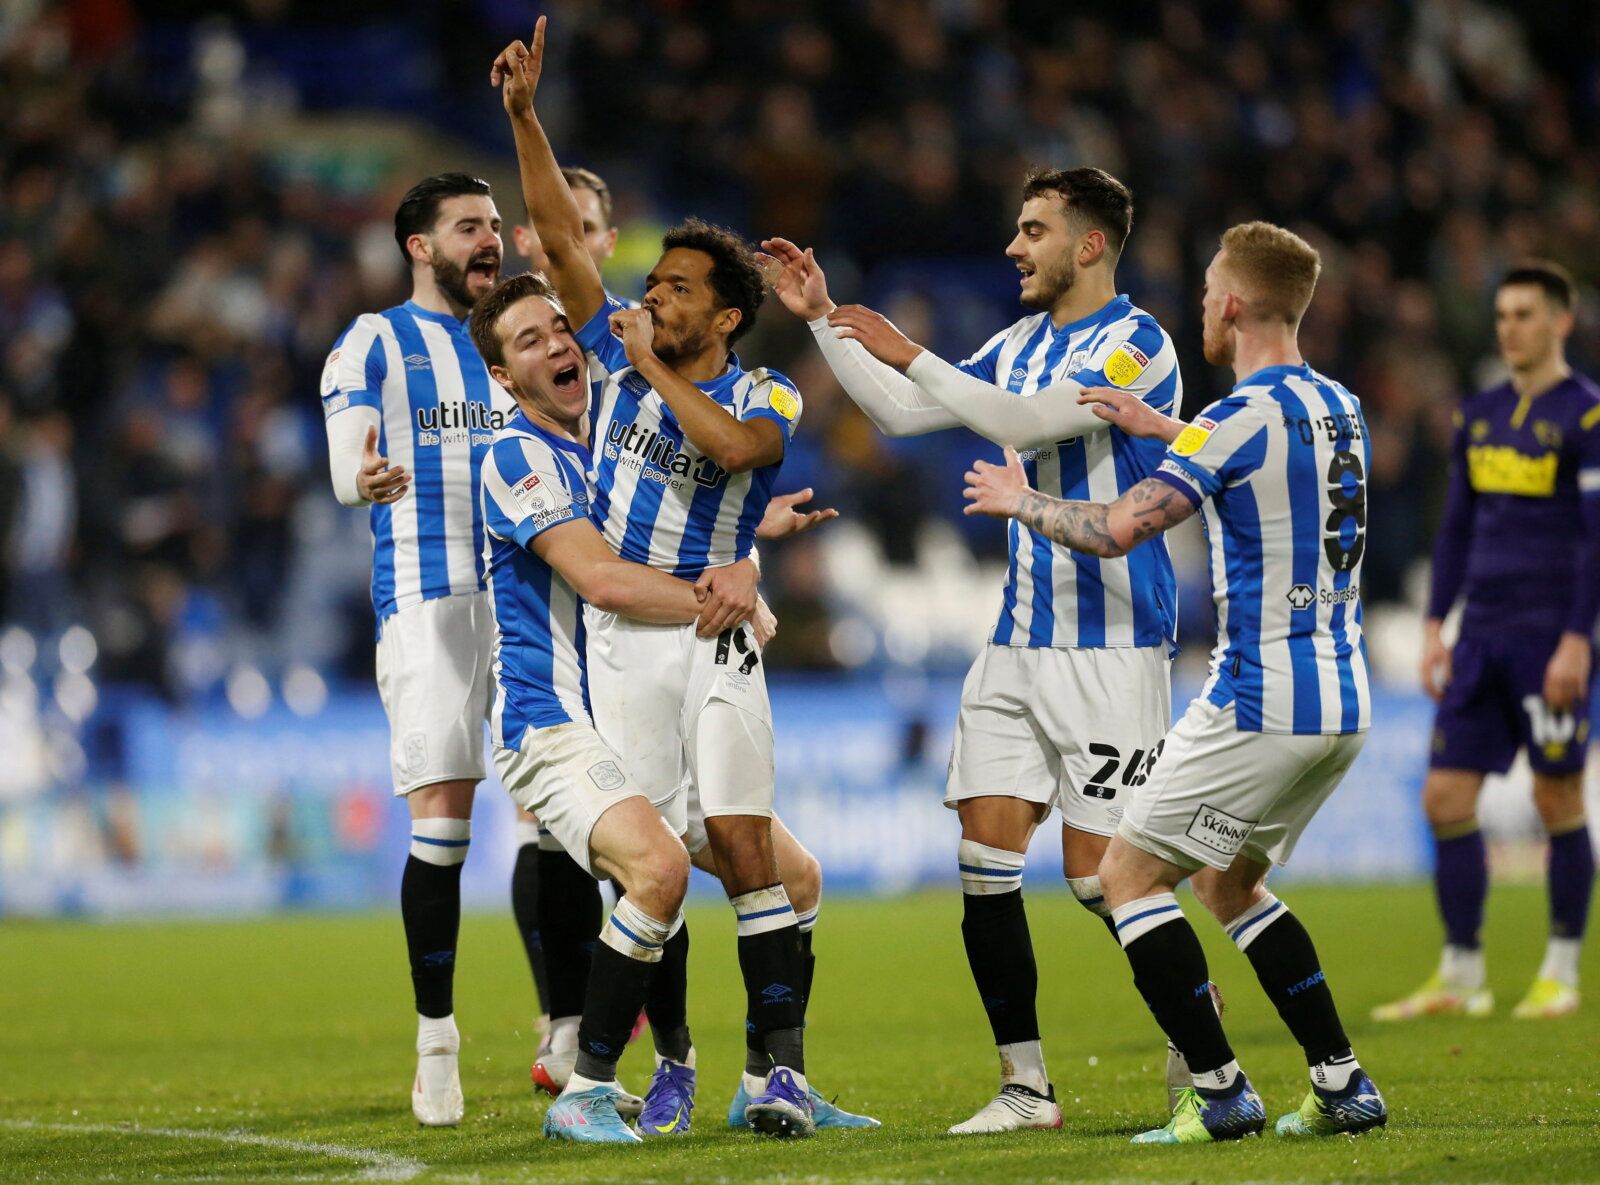 Soccer Football - Championship - Huddersfield Town v Derby County - John Smith's Stadium, Huddersfield, Britain - February 2, 2022 Huddersfield Town's Duane Holmes celebrates scoring their first goal with Carel Eiting   Action Images/Ed Sykes EDITORIAL USE ONLY. No use with unauthorized audio, video, data, fixture lists, club/league logos or 'live' services. Online in-match use limited to 75 images, no video emulation. No use in betting, games or single club /league/player publications. Please c